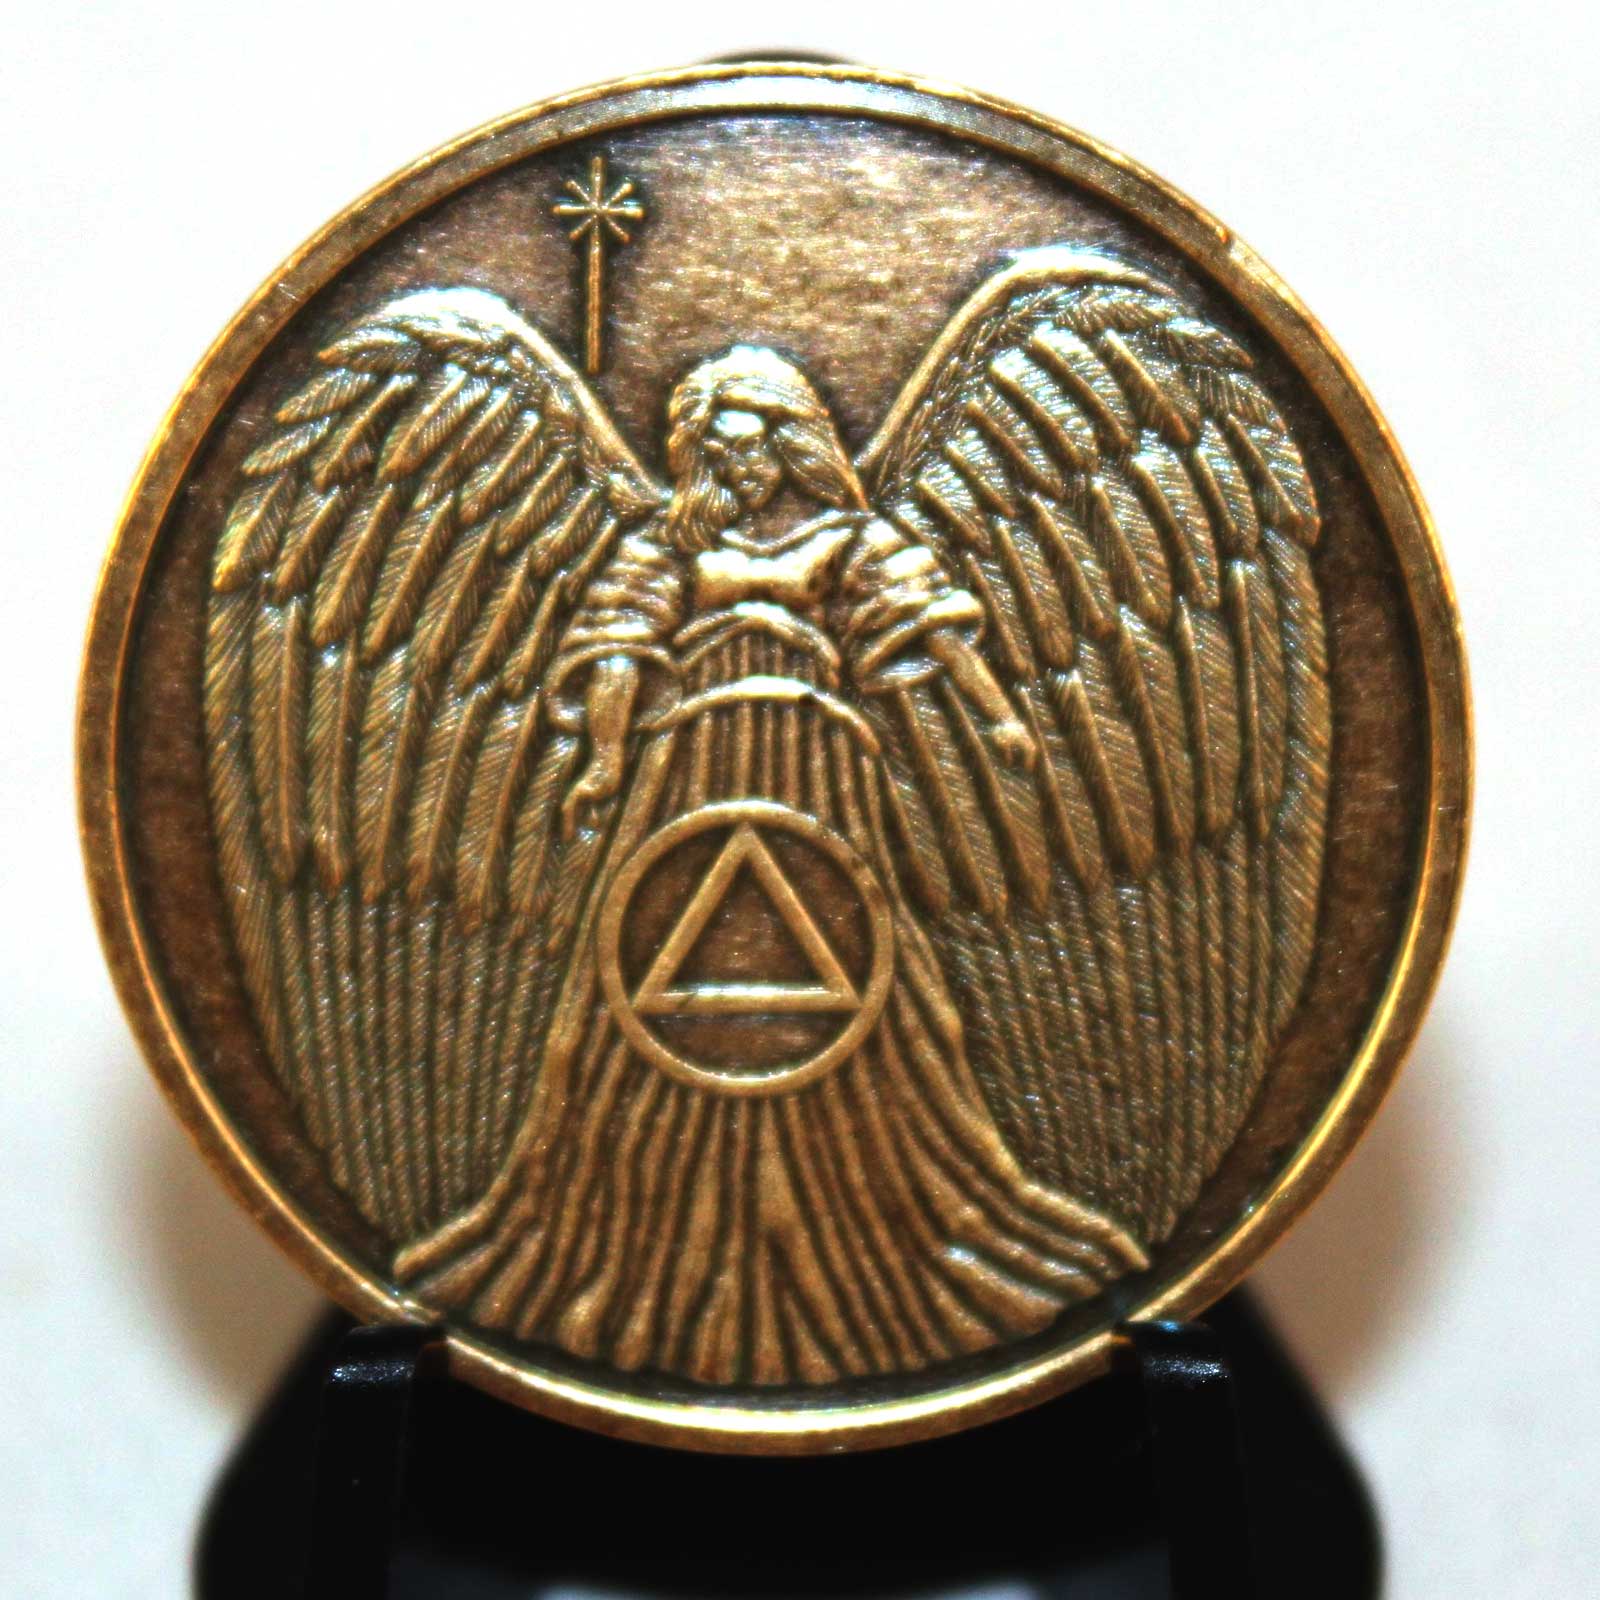 AA BRONZE ALCOHOLICS ANONYMOUS GUARDIAN ANGEL CHIP COIN MEDALLION NEW FREE SHIP 